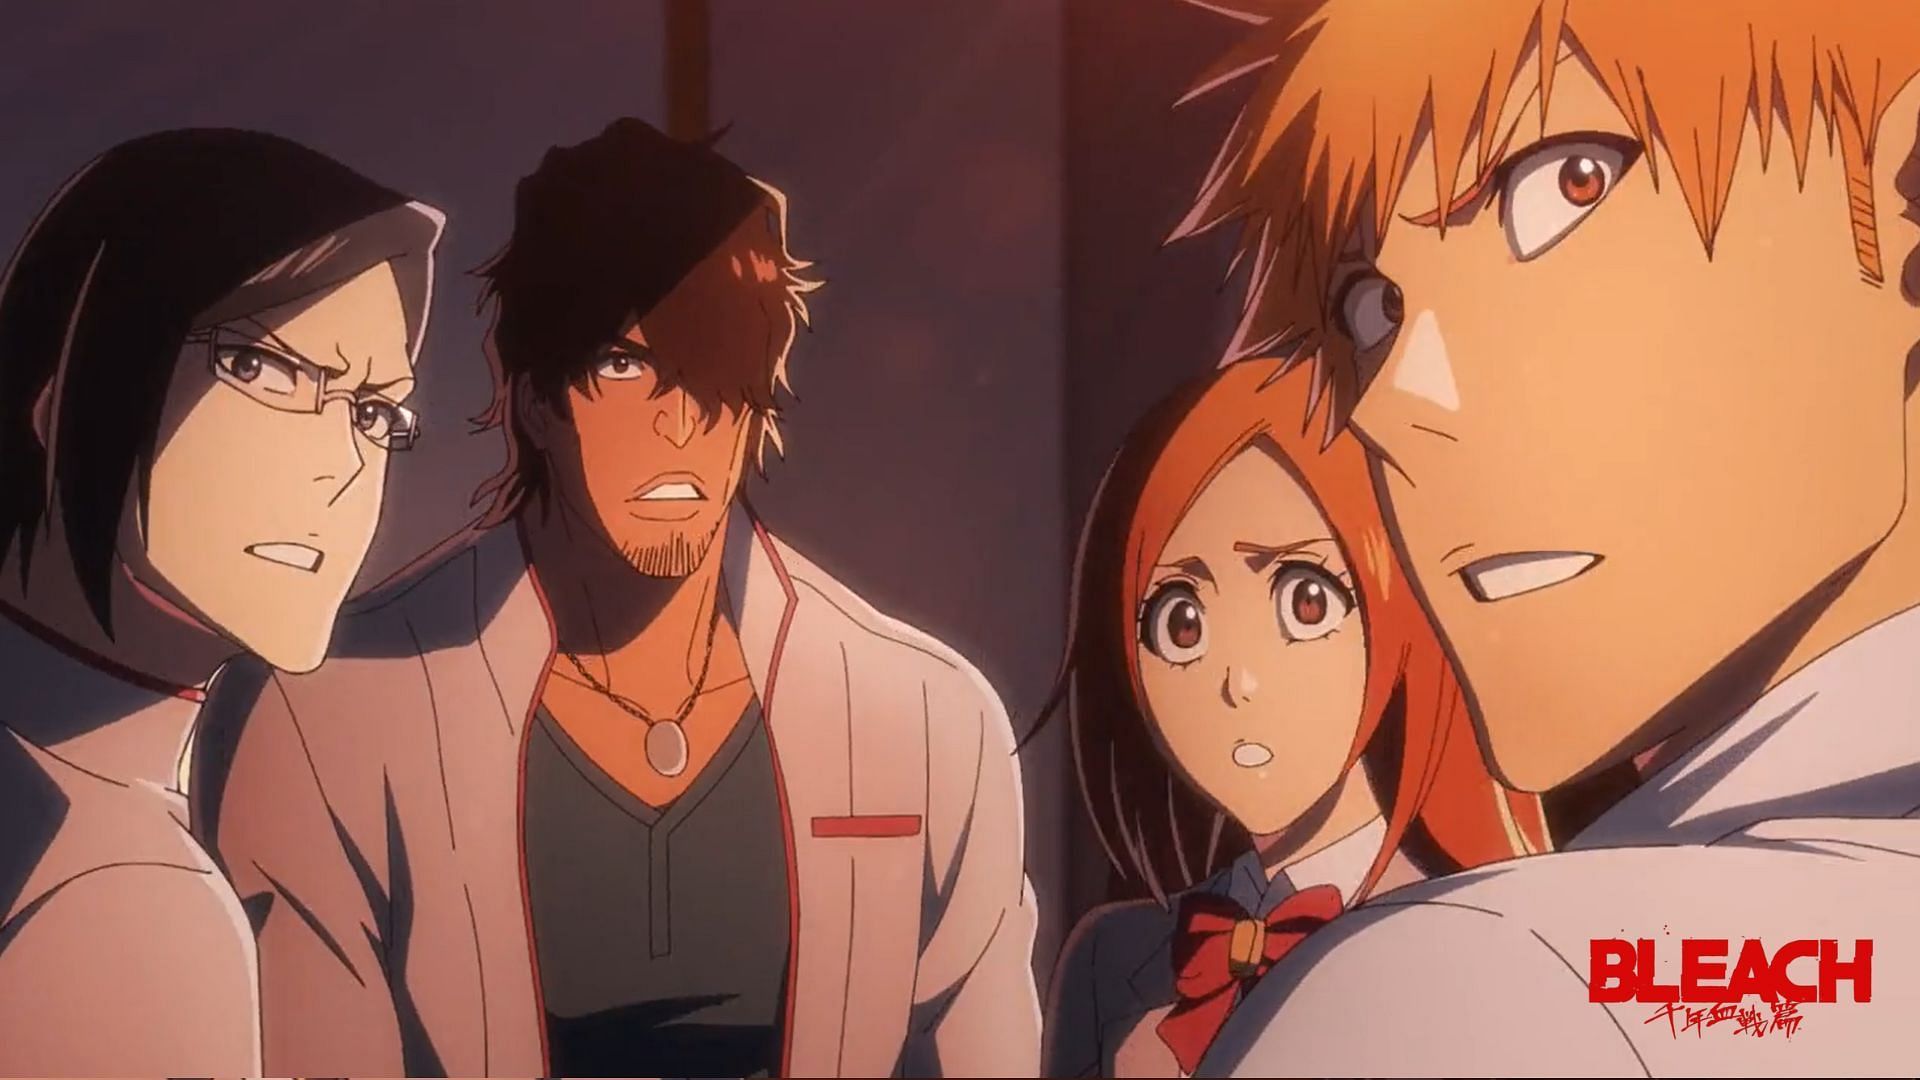 Bleach: Thousand-Year Blood War episode 1: Soul Society faces new